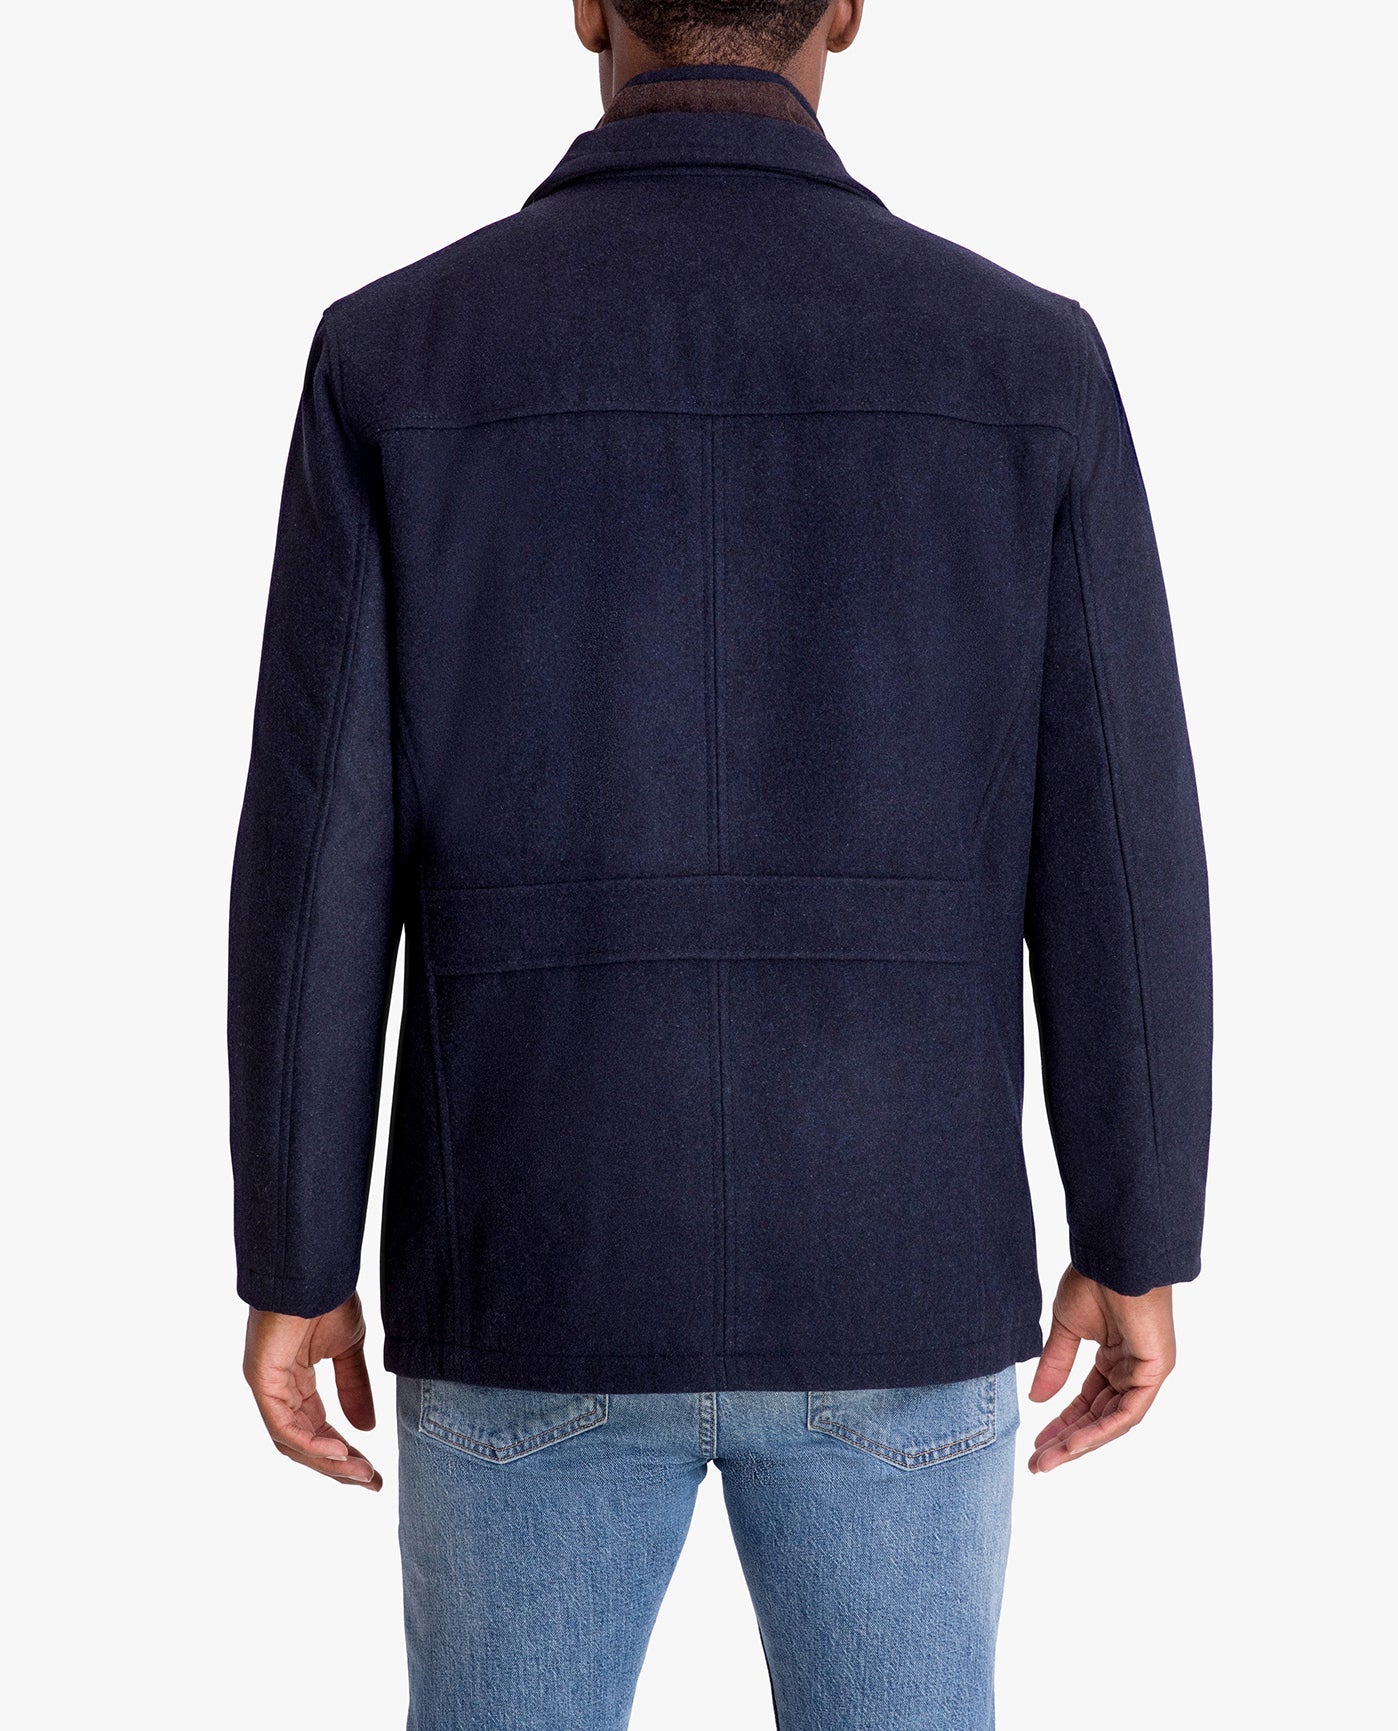 BACK VIEW OF AMHERST BUTTON FRONT WOOL JACKET | NAVY HEATHER